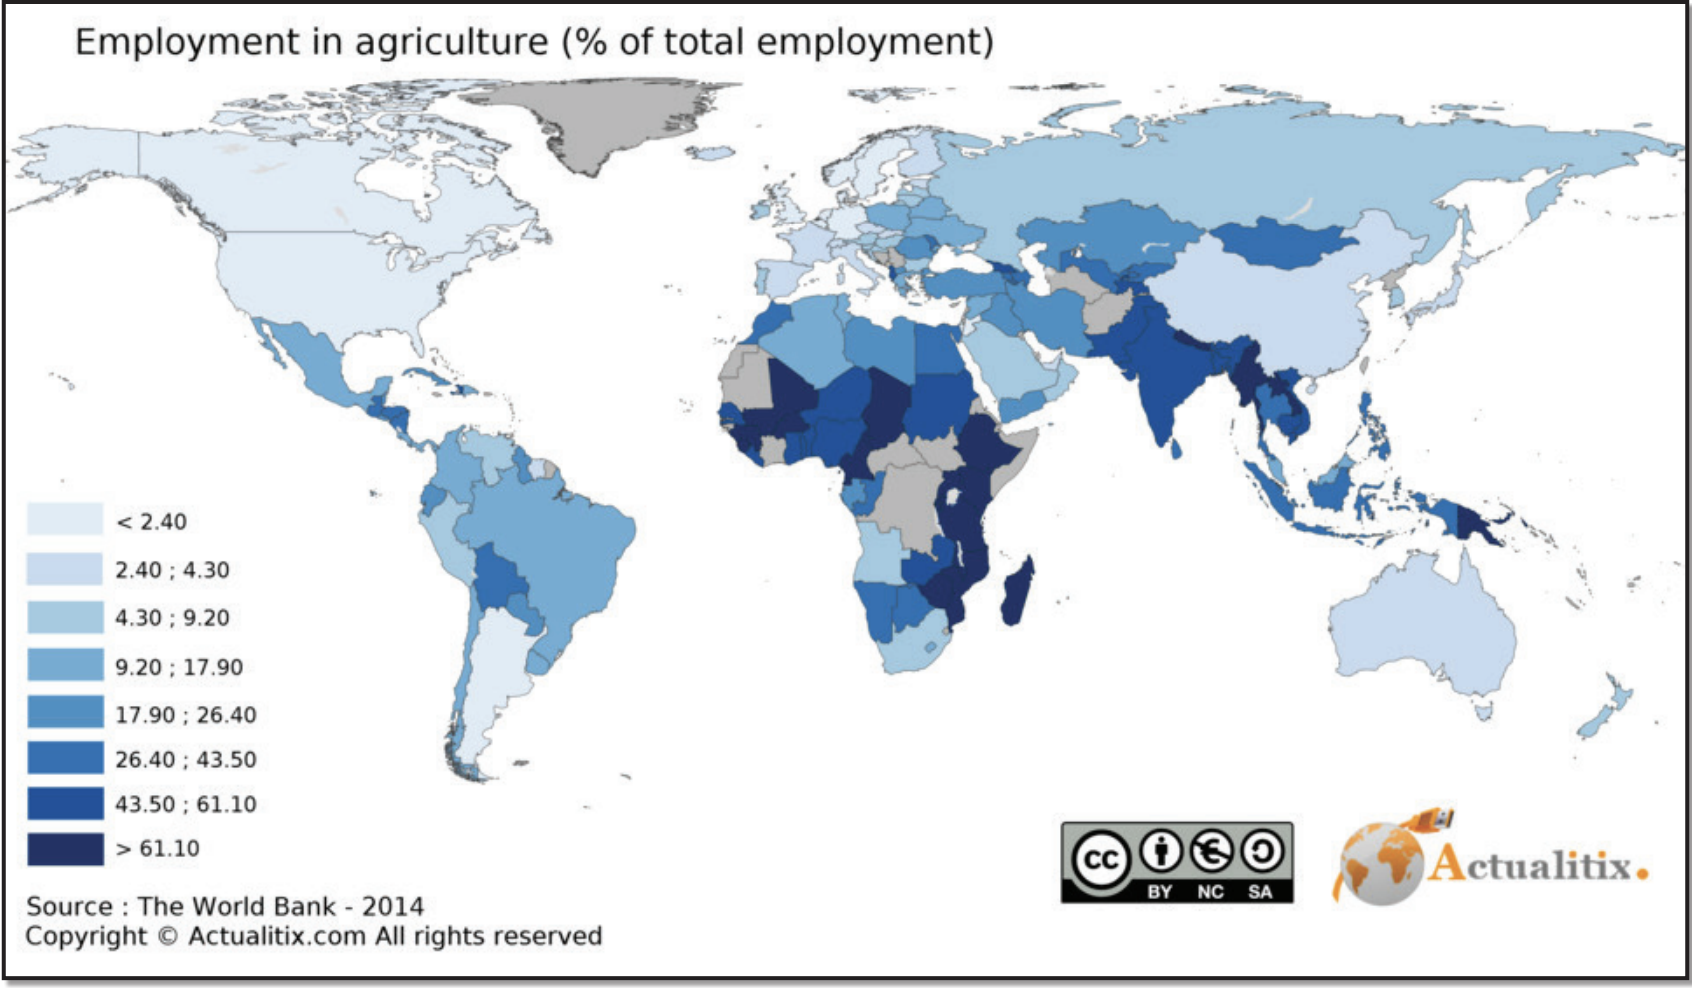 A world map showing ranges of Employment in Agriculture.